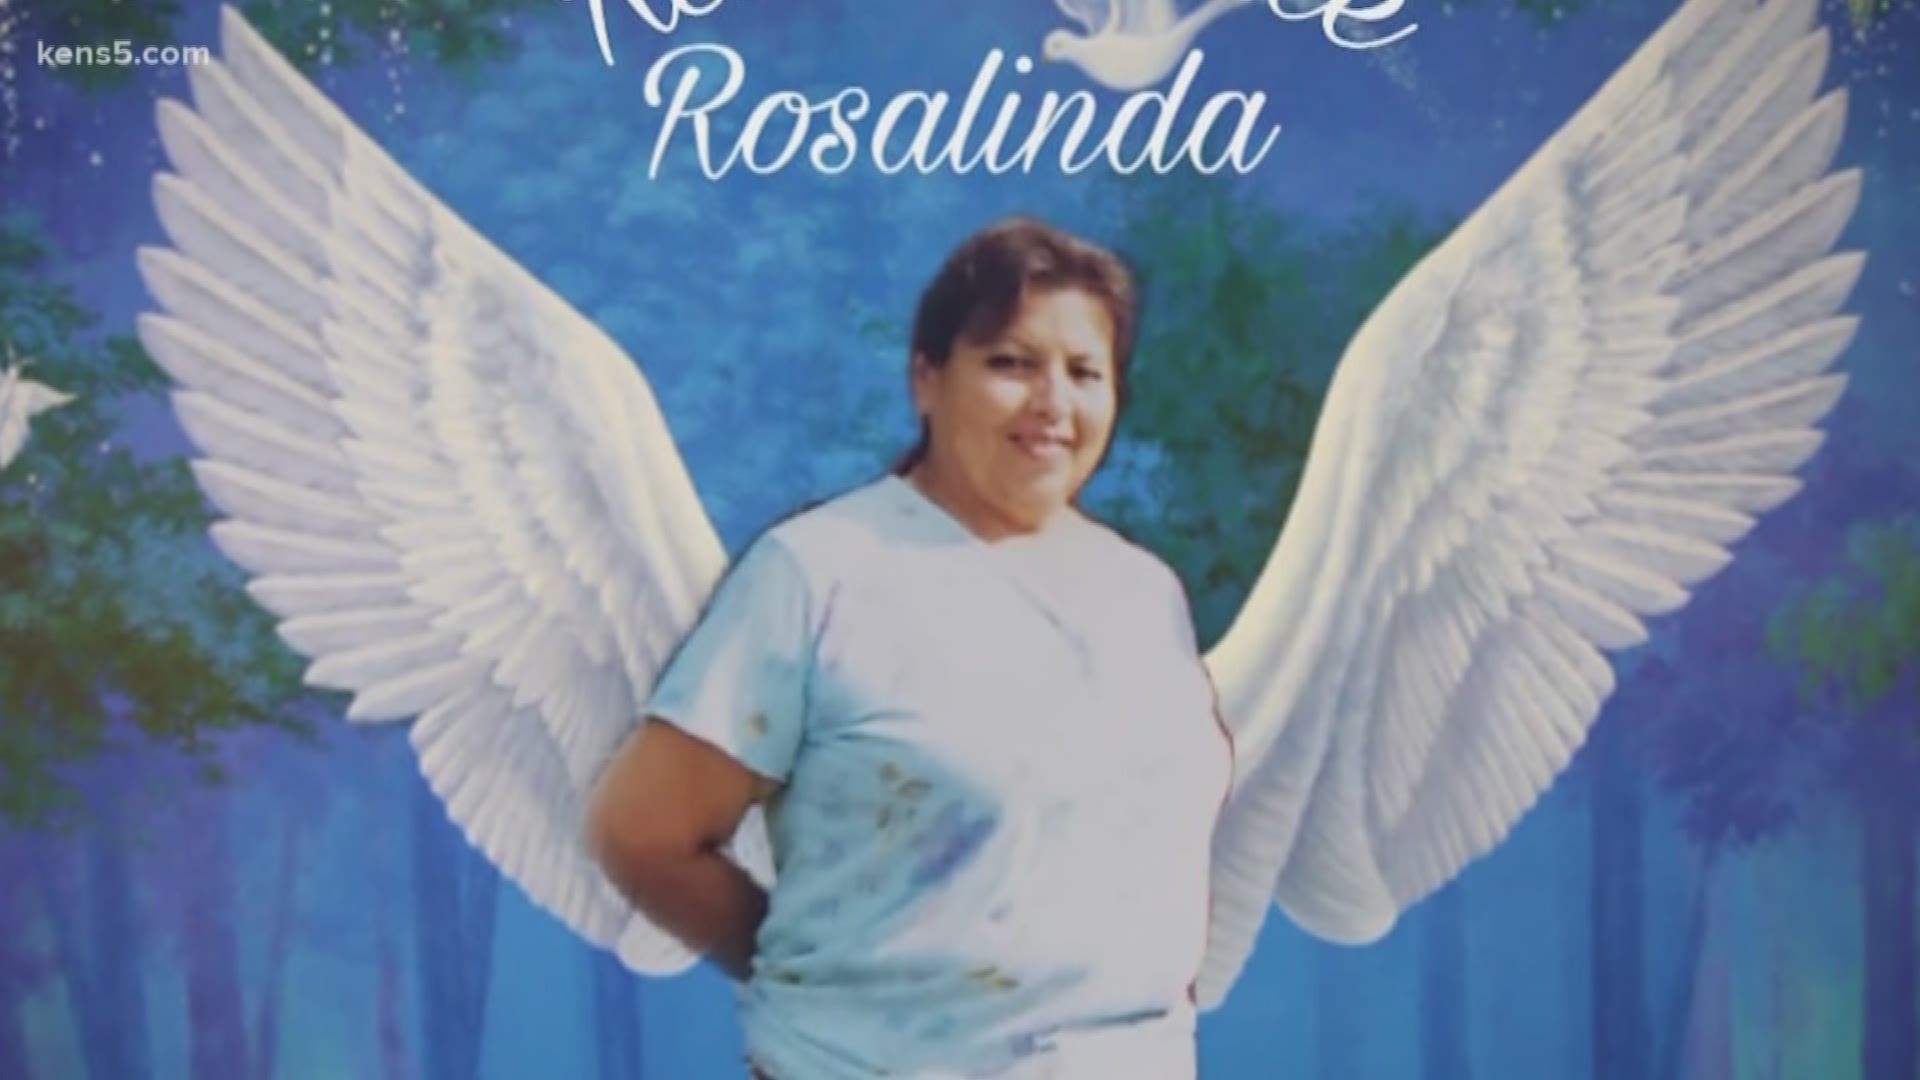 A family is asking for the community's help after losing the matriarch of their family after being killed in a horrible crash. Rosalinda Portillo died after being hit by a truck in downtown San Antonio last week.